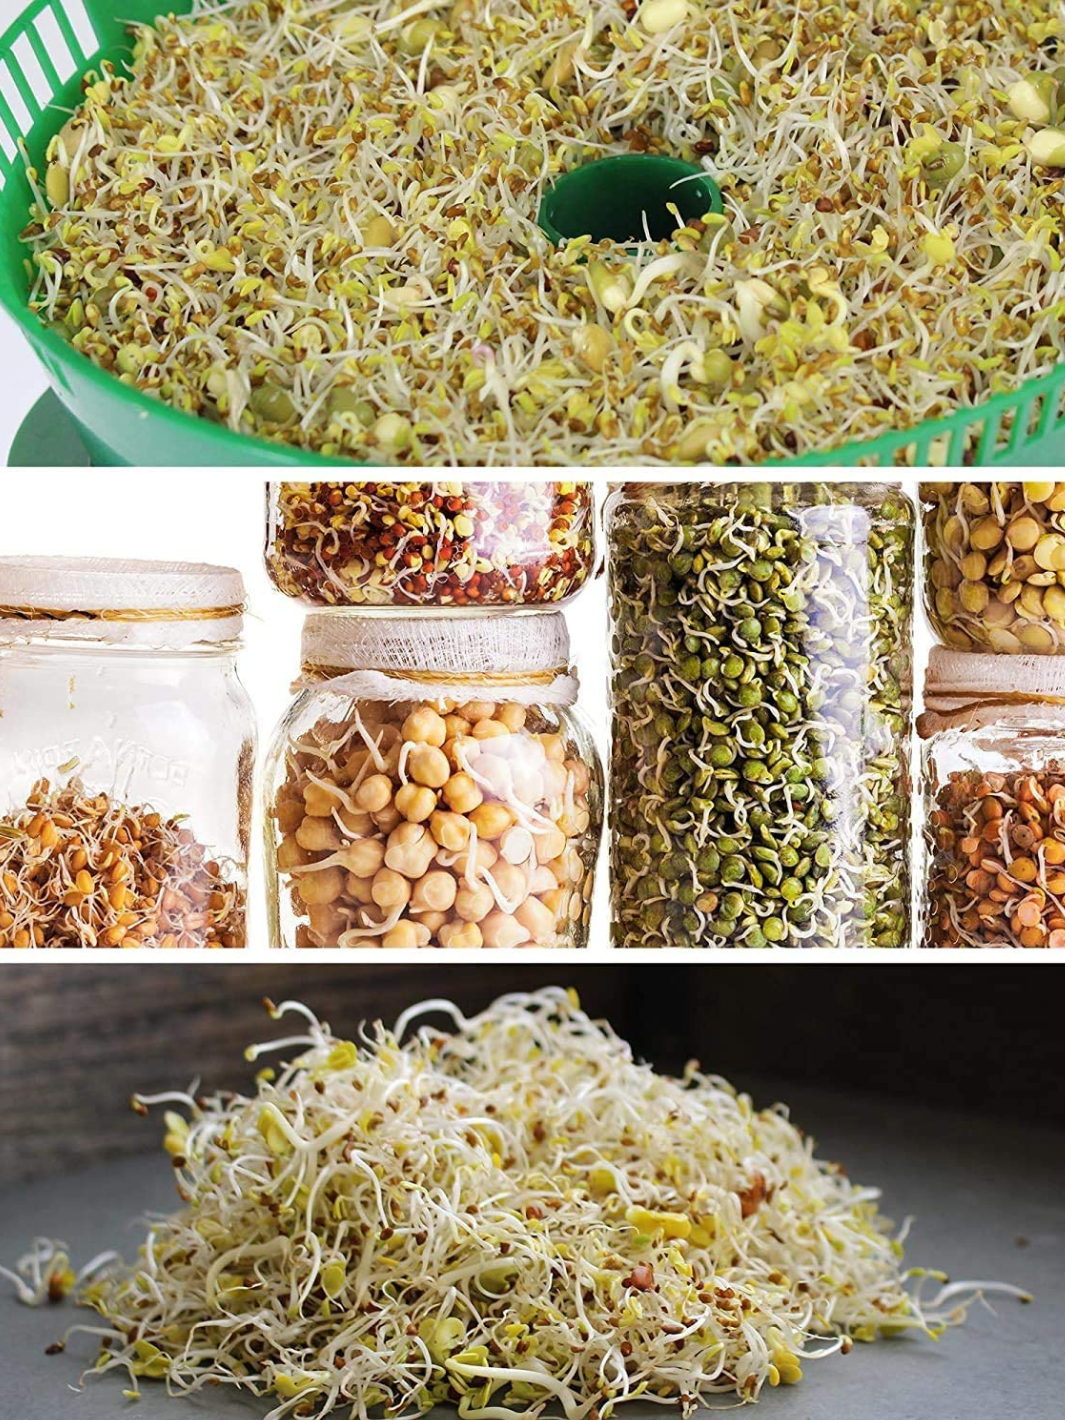 Handy Pantry Organic 5 Part Salad Mix Sprouting Seeds Results